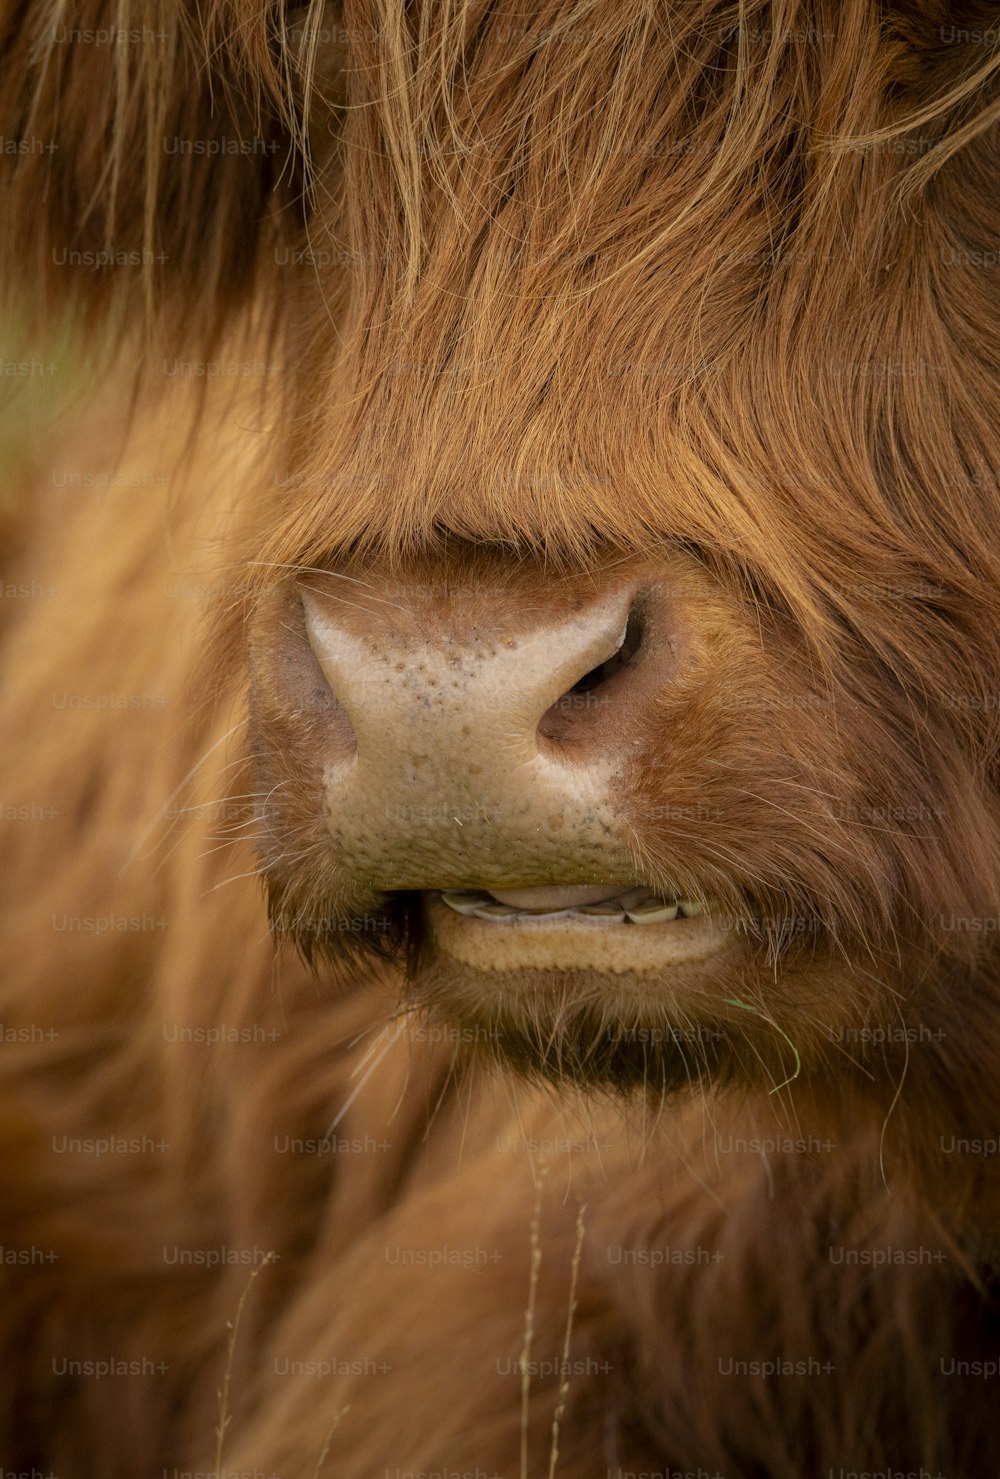 a close up of a brown cow's face